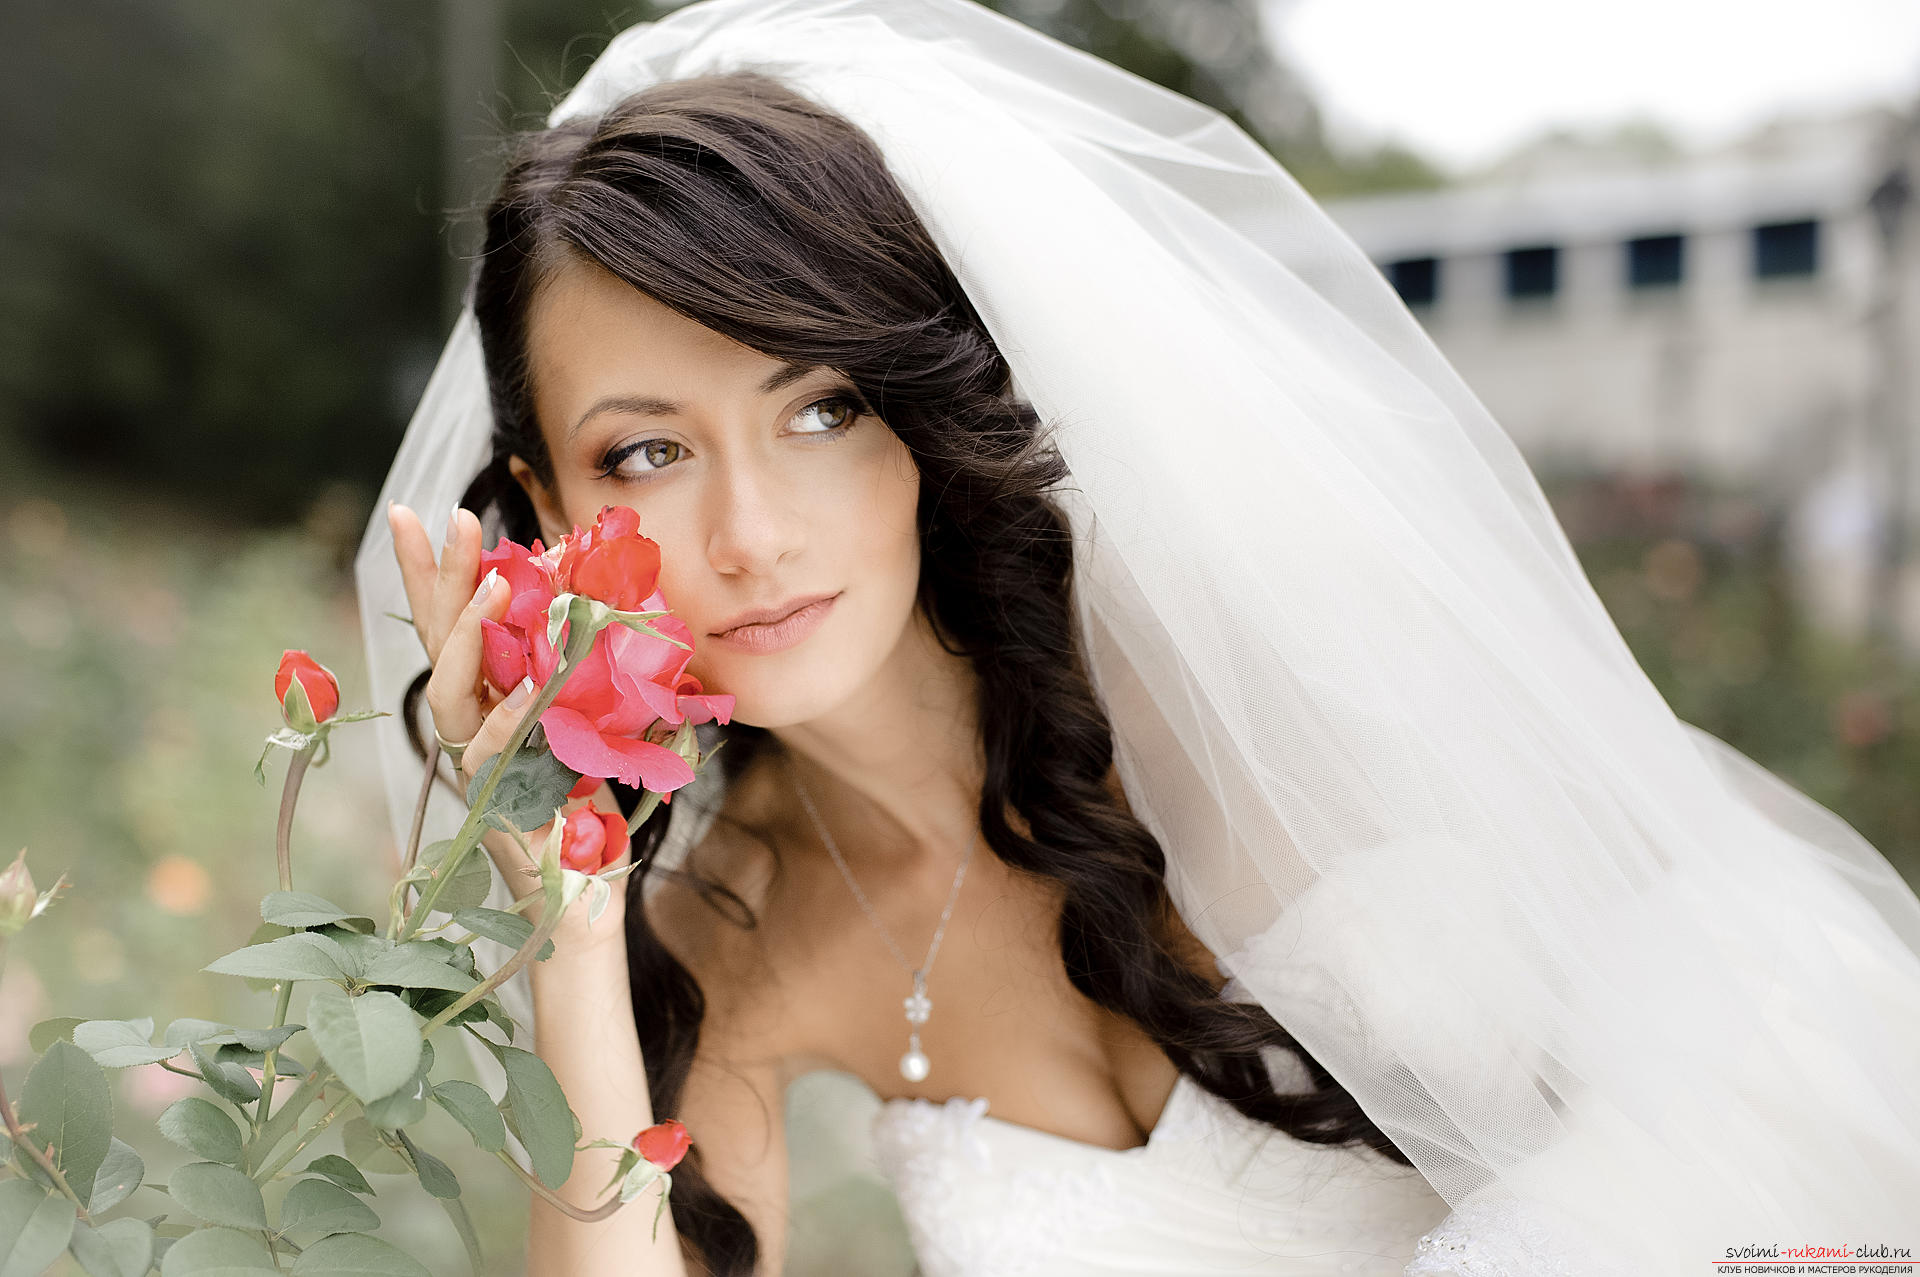 Hairstyles for the bride with a long veil. Photo №5